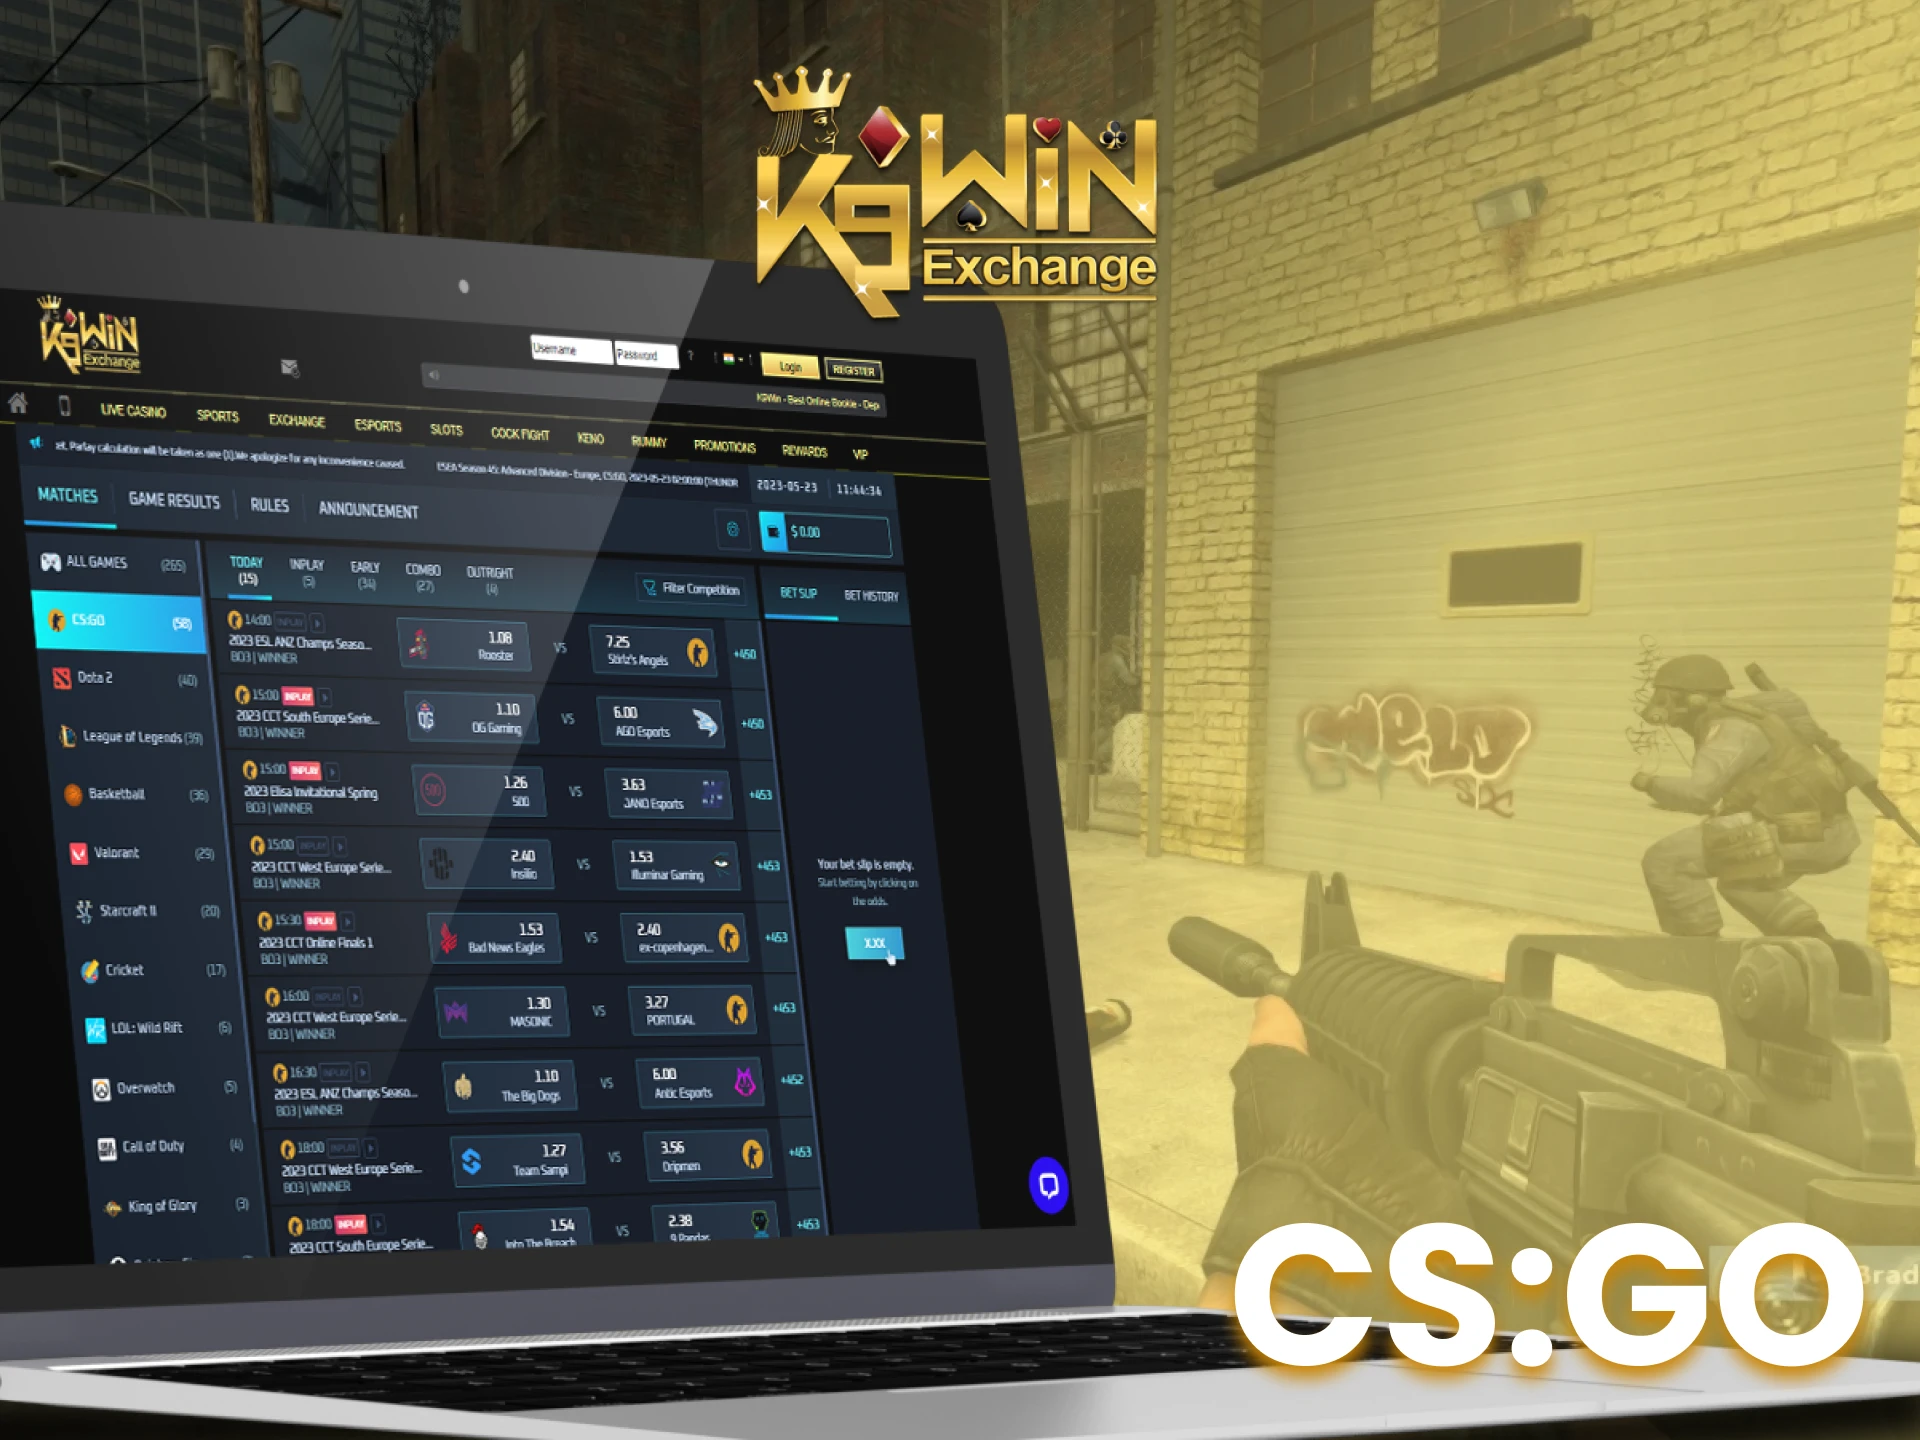 CS:GO is a great esport to bet on the K9Win sports page.